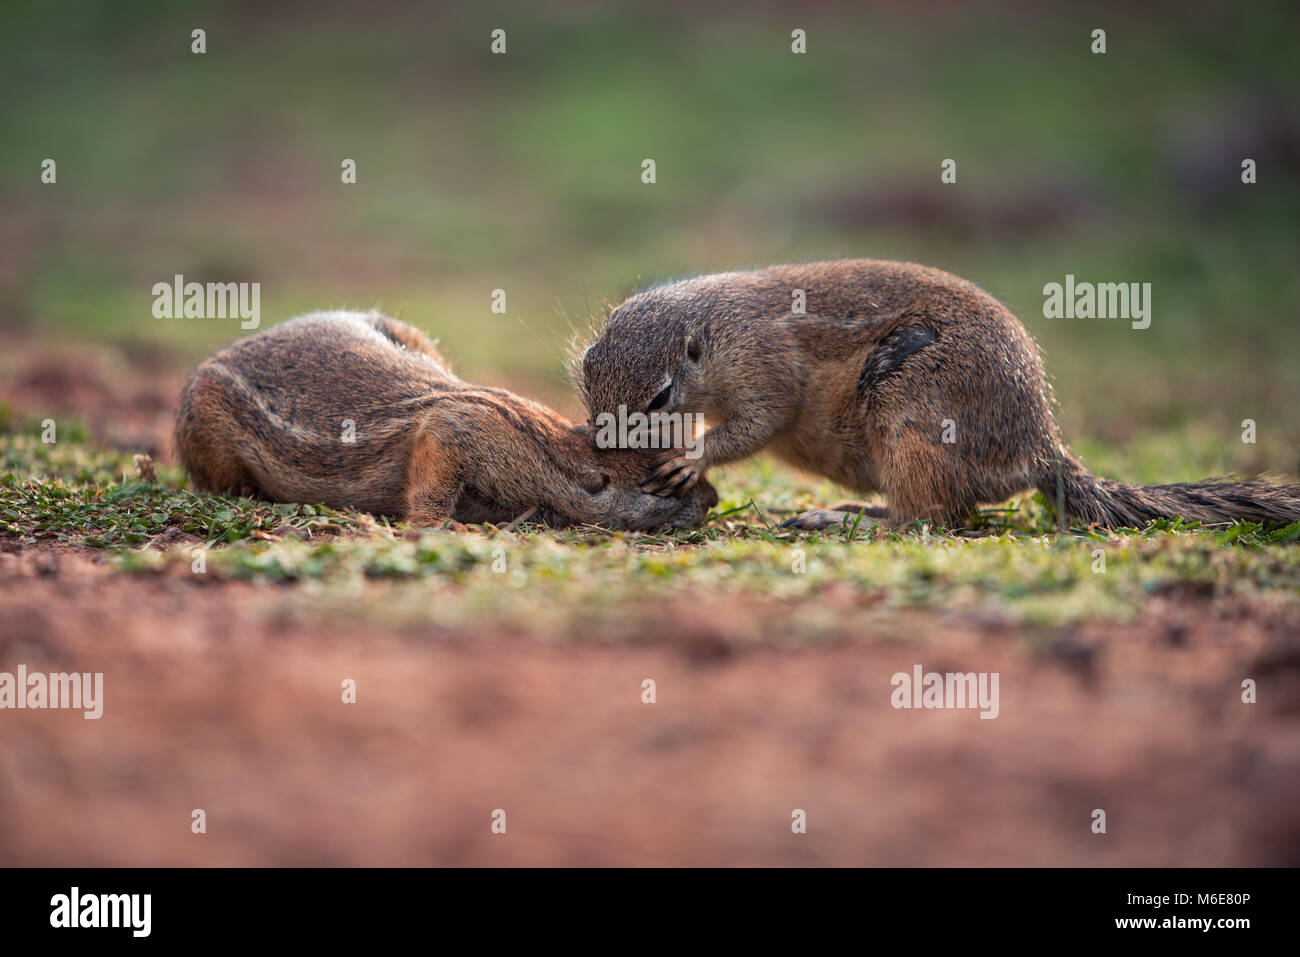 African ground squirrels engaging in playful and endearing mutual grooming Stock Photo